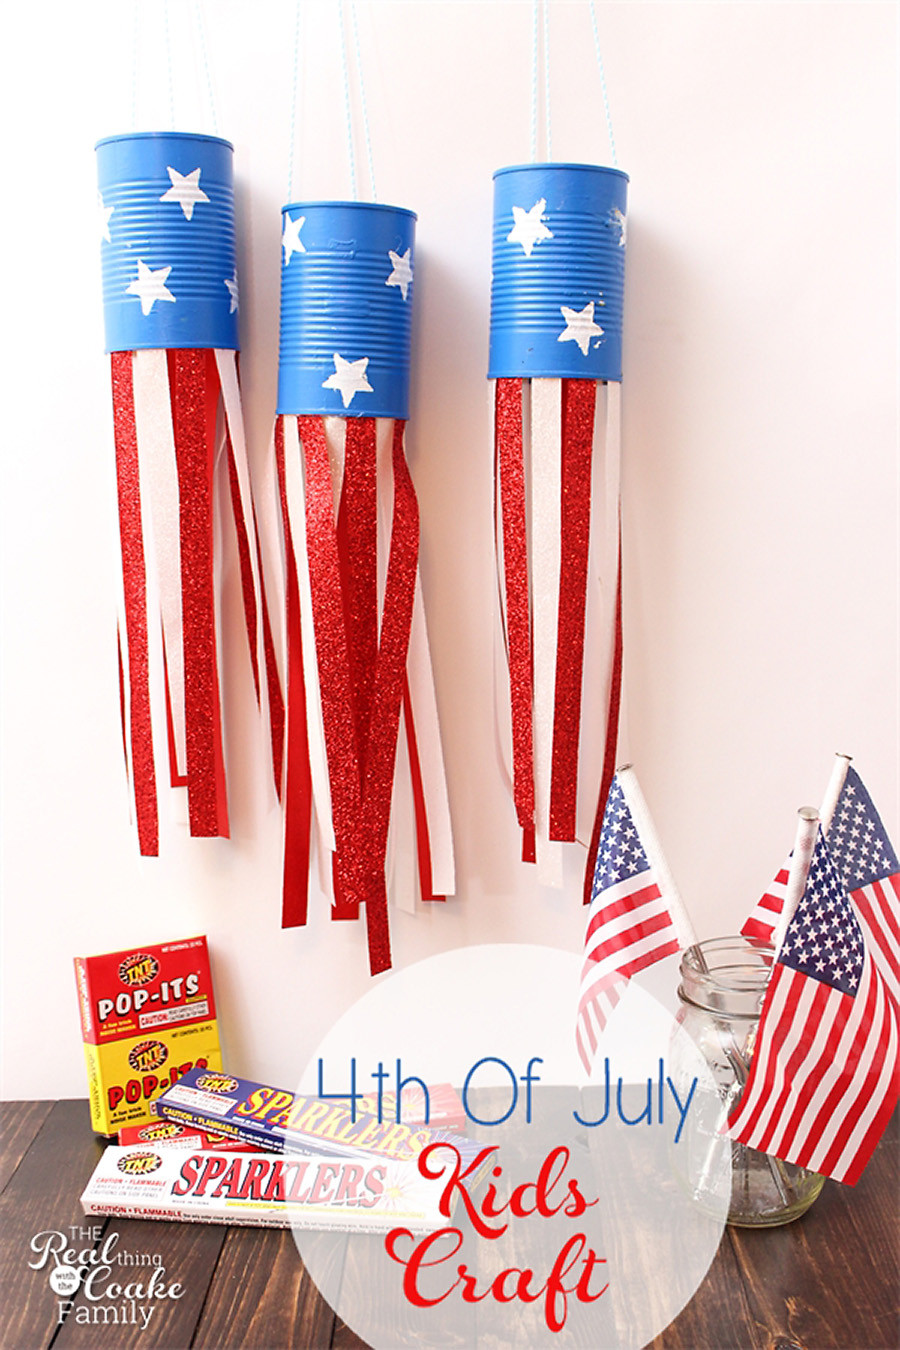 Pinterest 4th Of July Crafts
 10 Fun and Free 4th of July Crafts for Kids Our